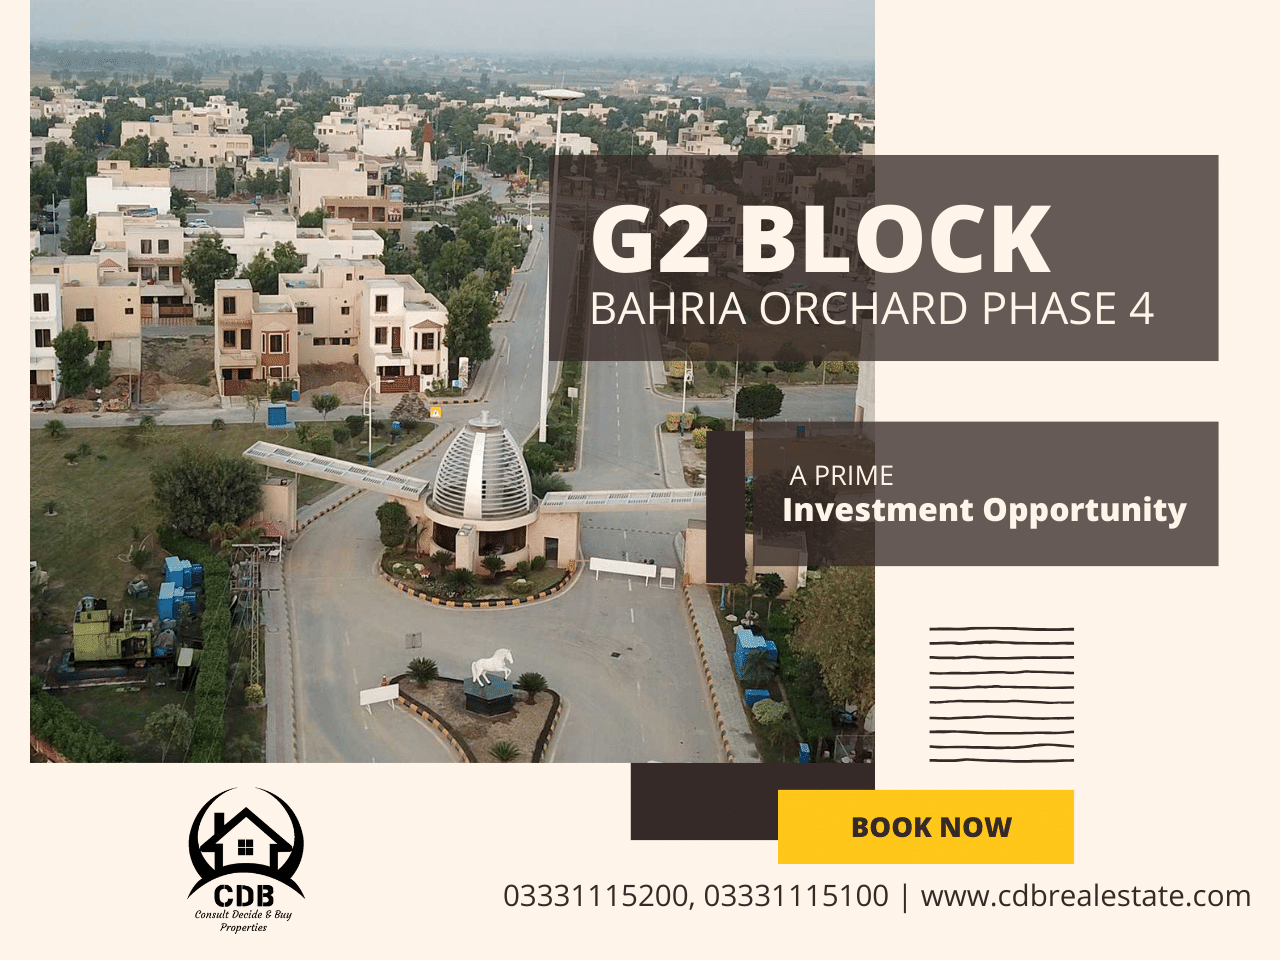 G2 Block in Bahria Orchard Phase 4